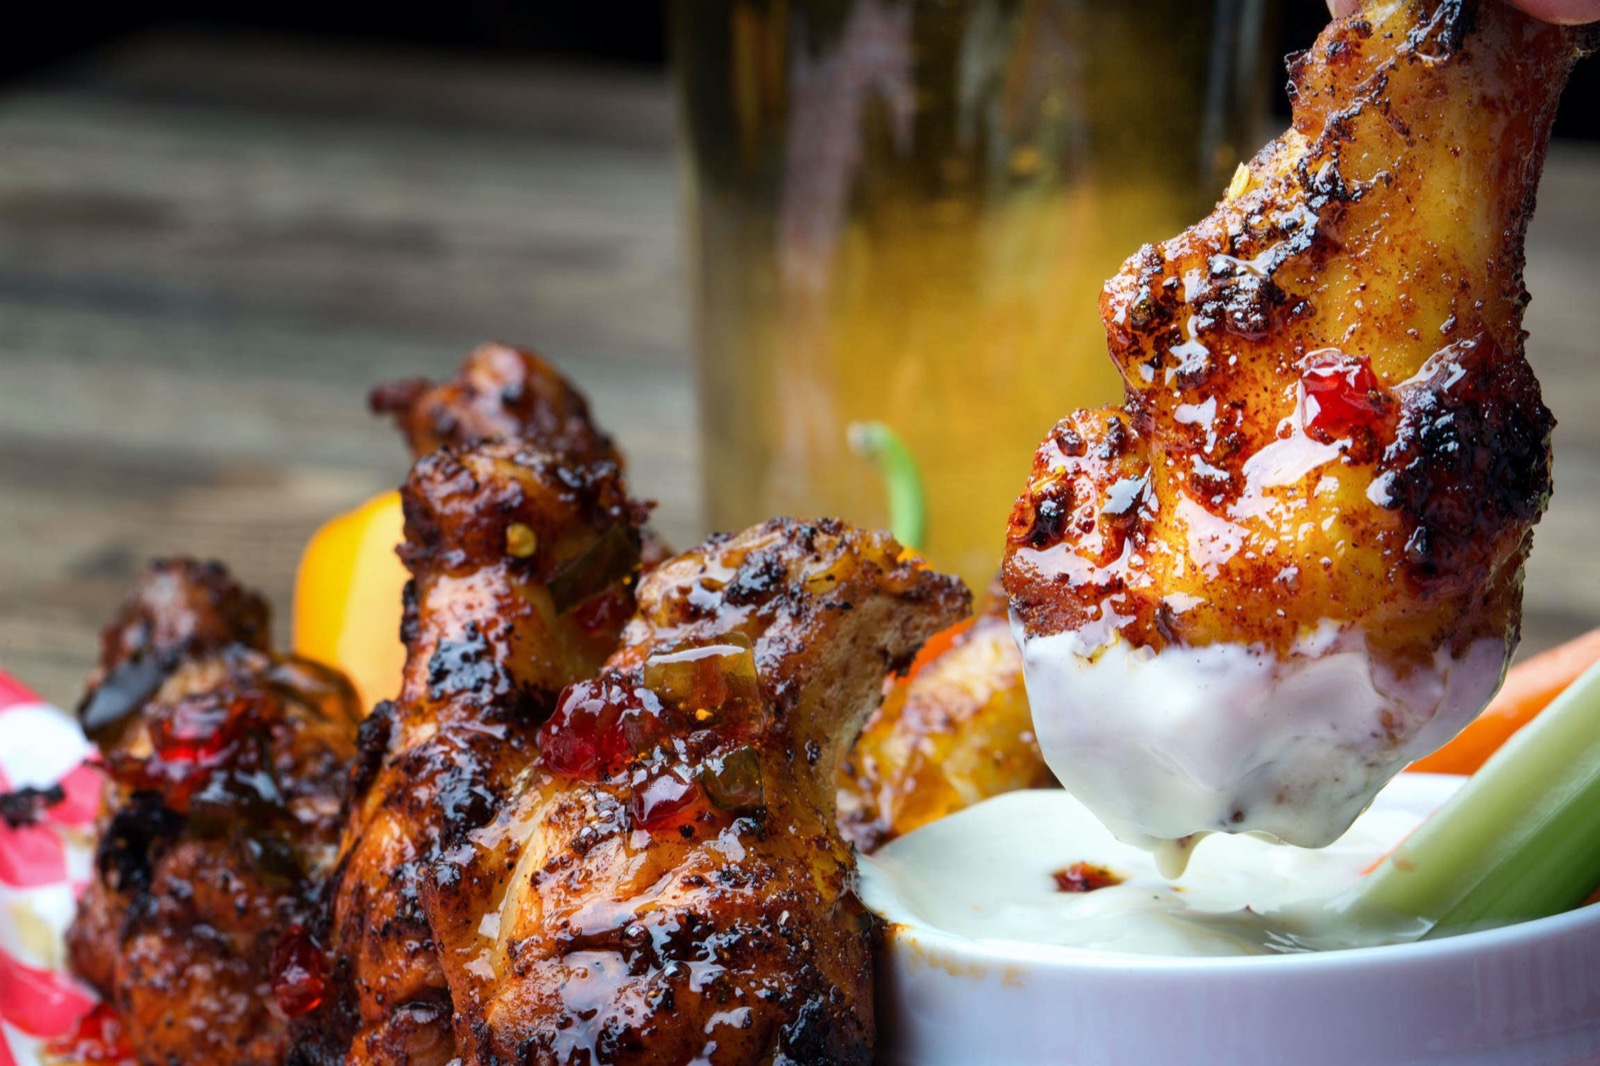 Take a Trip to New York City to Find Out Where You’ll Meet Your Soulmate Buffalo wings and blue cheese